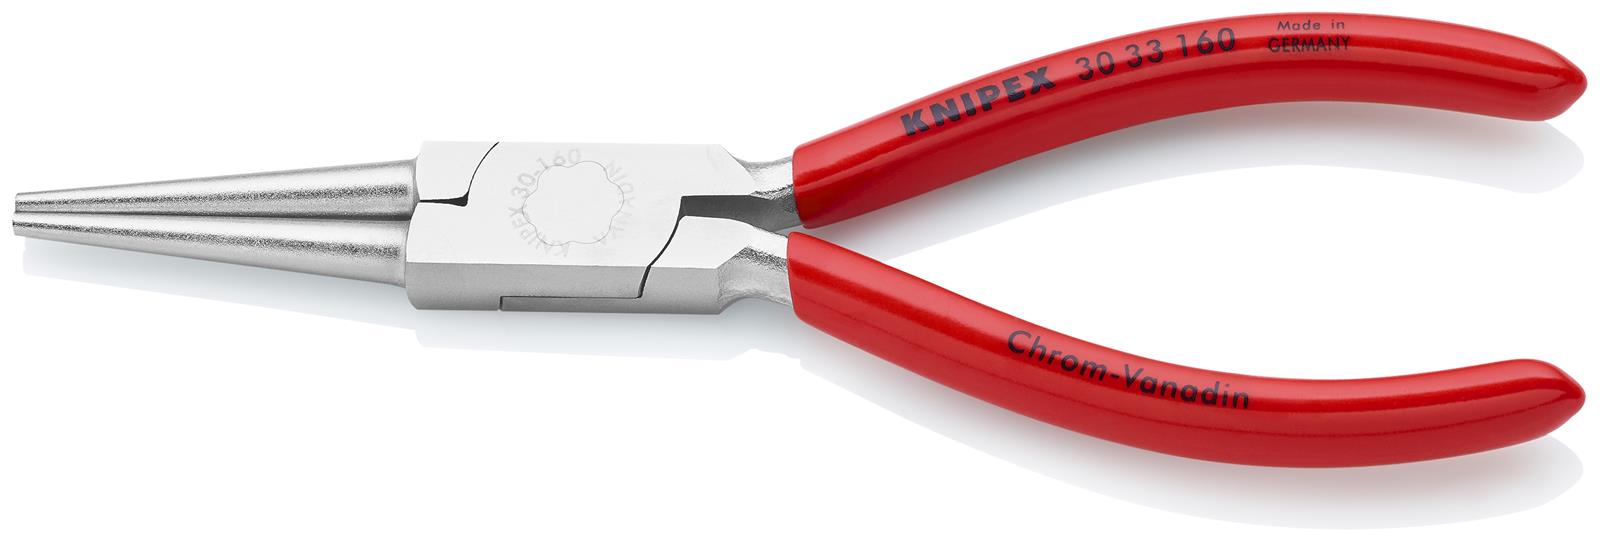 Buy KNIPEX 30 33 160 - Long Nose Pliers-Round Tips at